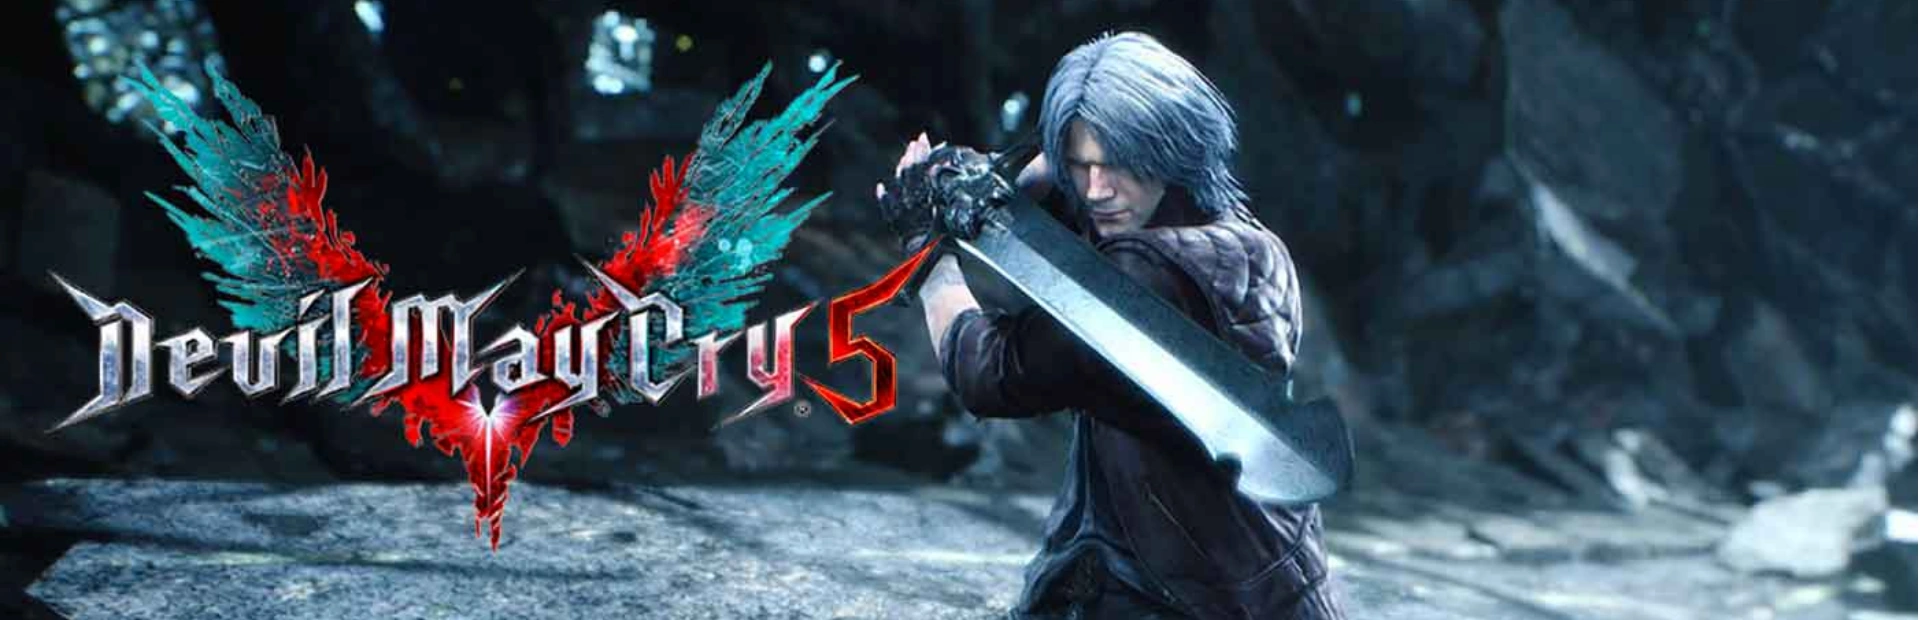 DEVIL MAY CRY 5.banner3